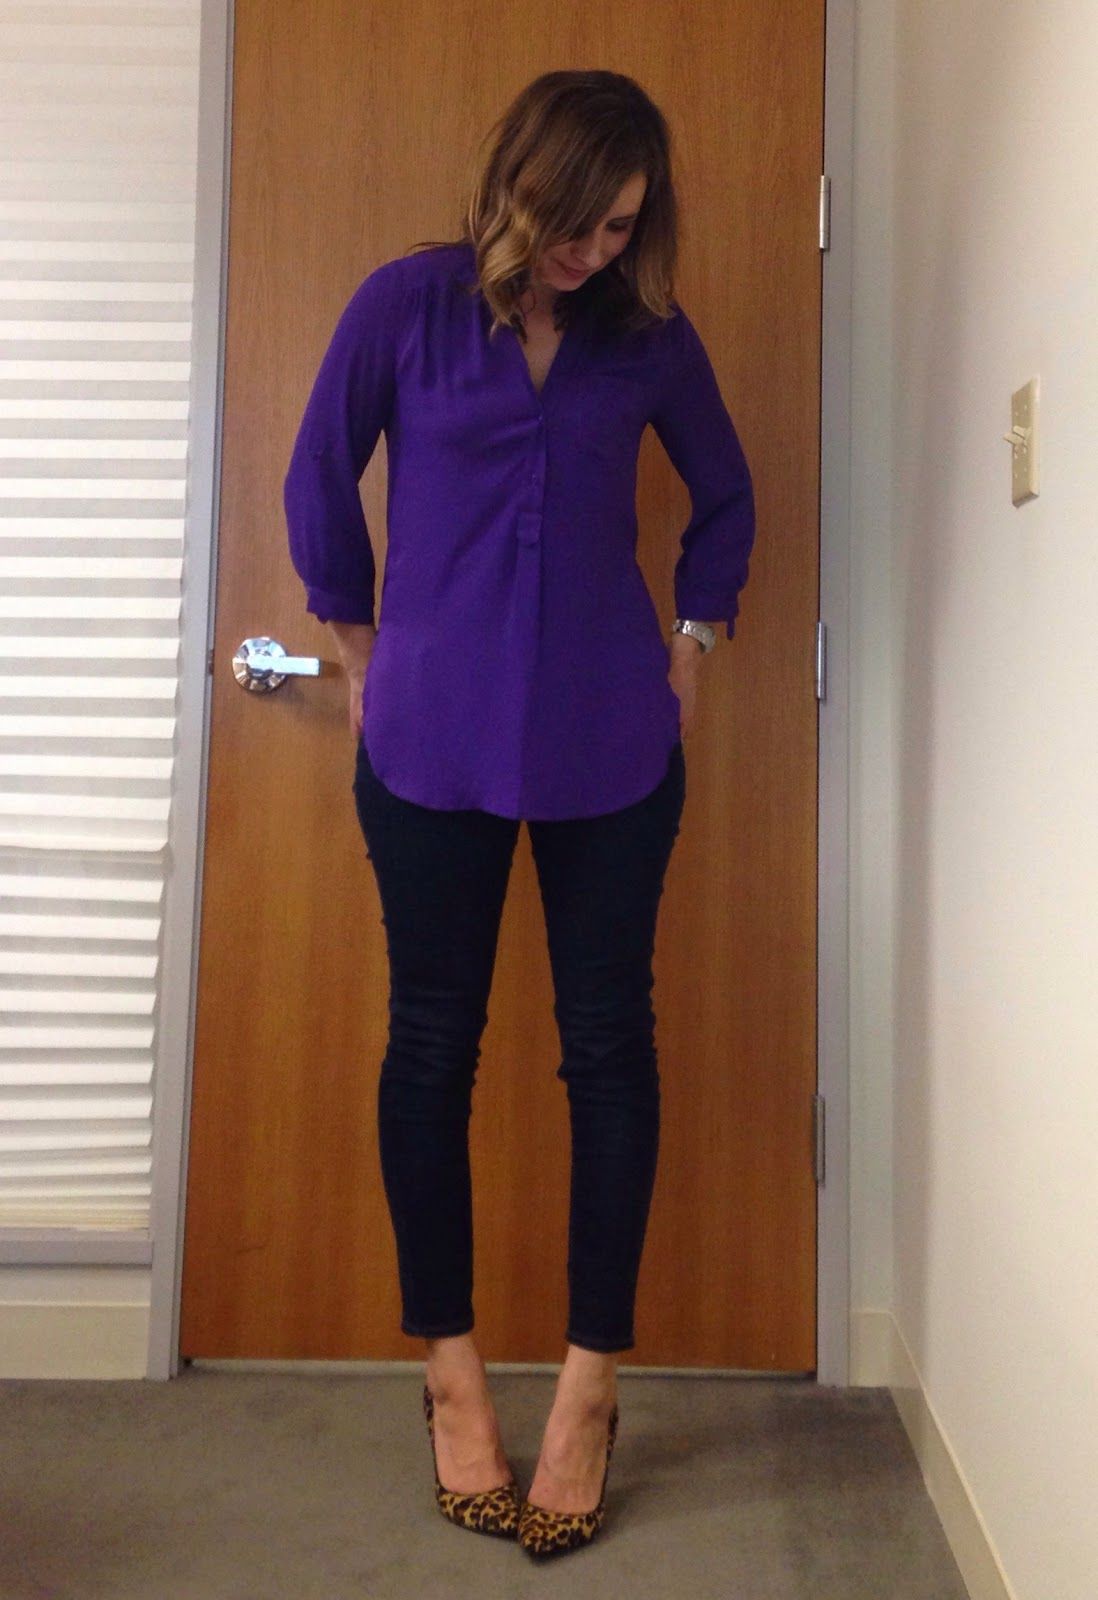 What Color Pants To Wear With Purple Shirt Women's? – Majesda